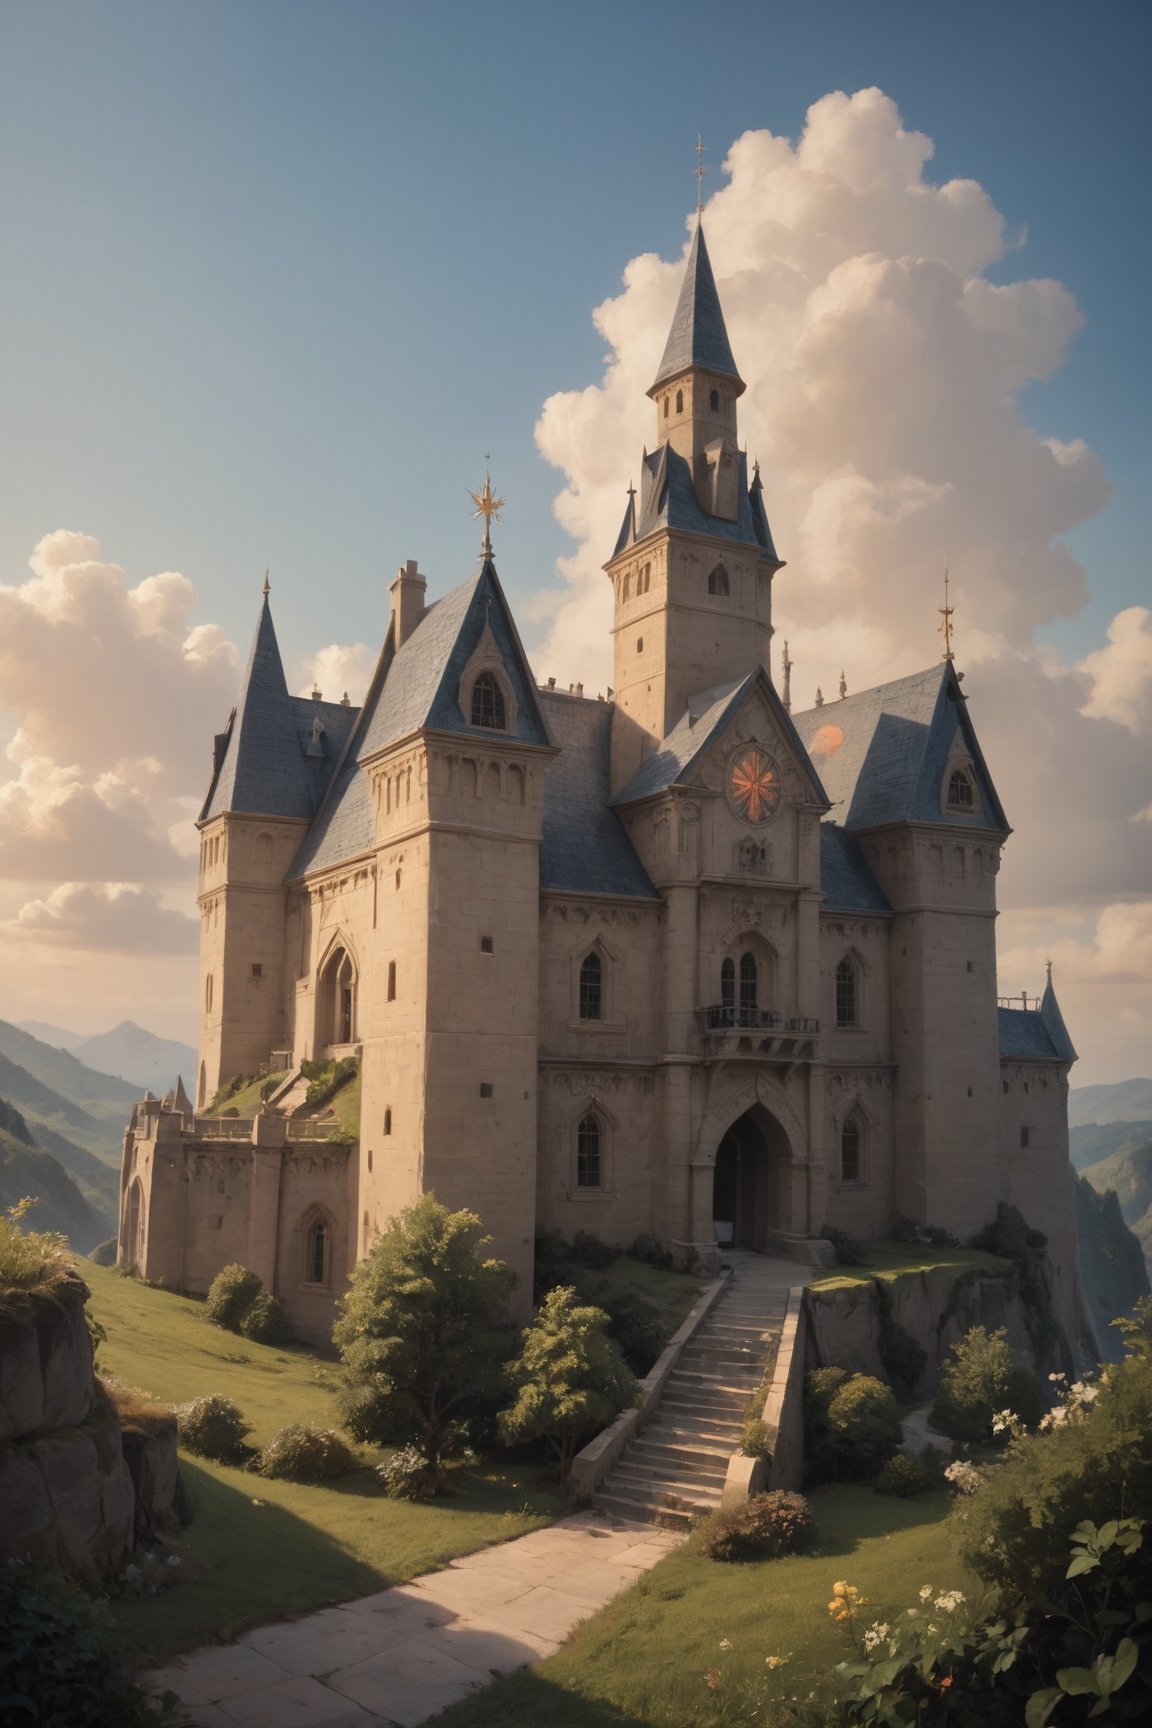 score_9_up, score_8_up, score_7_up, score_9_up, score_8_up, score_8_up, 

professional photo, masterpiece, photorealistic, hyper-detailed, realistic, ultra-high resolution, highest quality 

Generate an image showing a majestic medieval castle at sunrise. The castle should be situated on a hill, overlooking the vast valley below. Its stone walls and towers are illuminated by the first rays of the sun, giving them a golden glow. The rising sun creates a warm, orange-pink glow in the sky, with delicate clouds reflecting these colors. 

There are dense forests around the castle, and in the valley you can see the river flowing along the castle walls. In the castle courtyard, you can see knights and horses preparing for the day, as well as flags flying from the towers. The entire scene should exude calm and majestic beauty, emphasizing the historic and epic nature of the place.